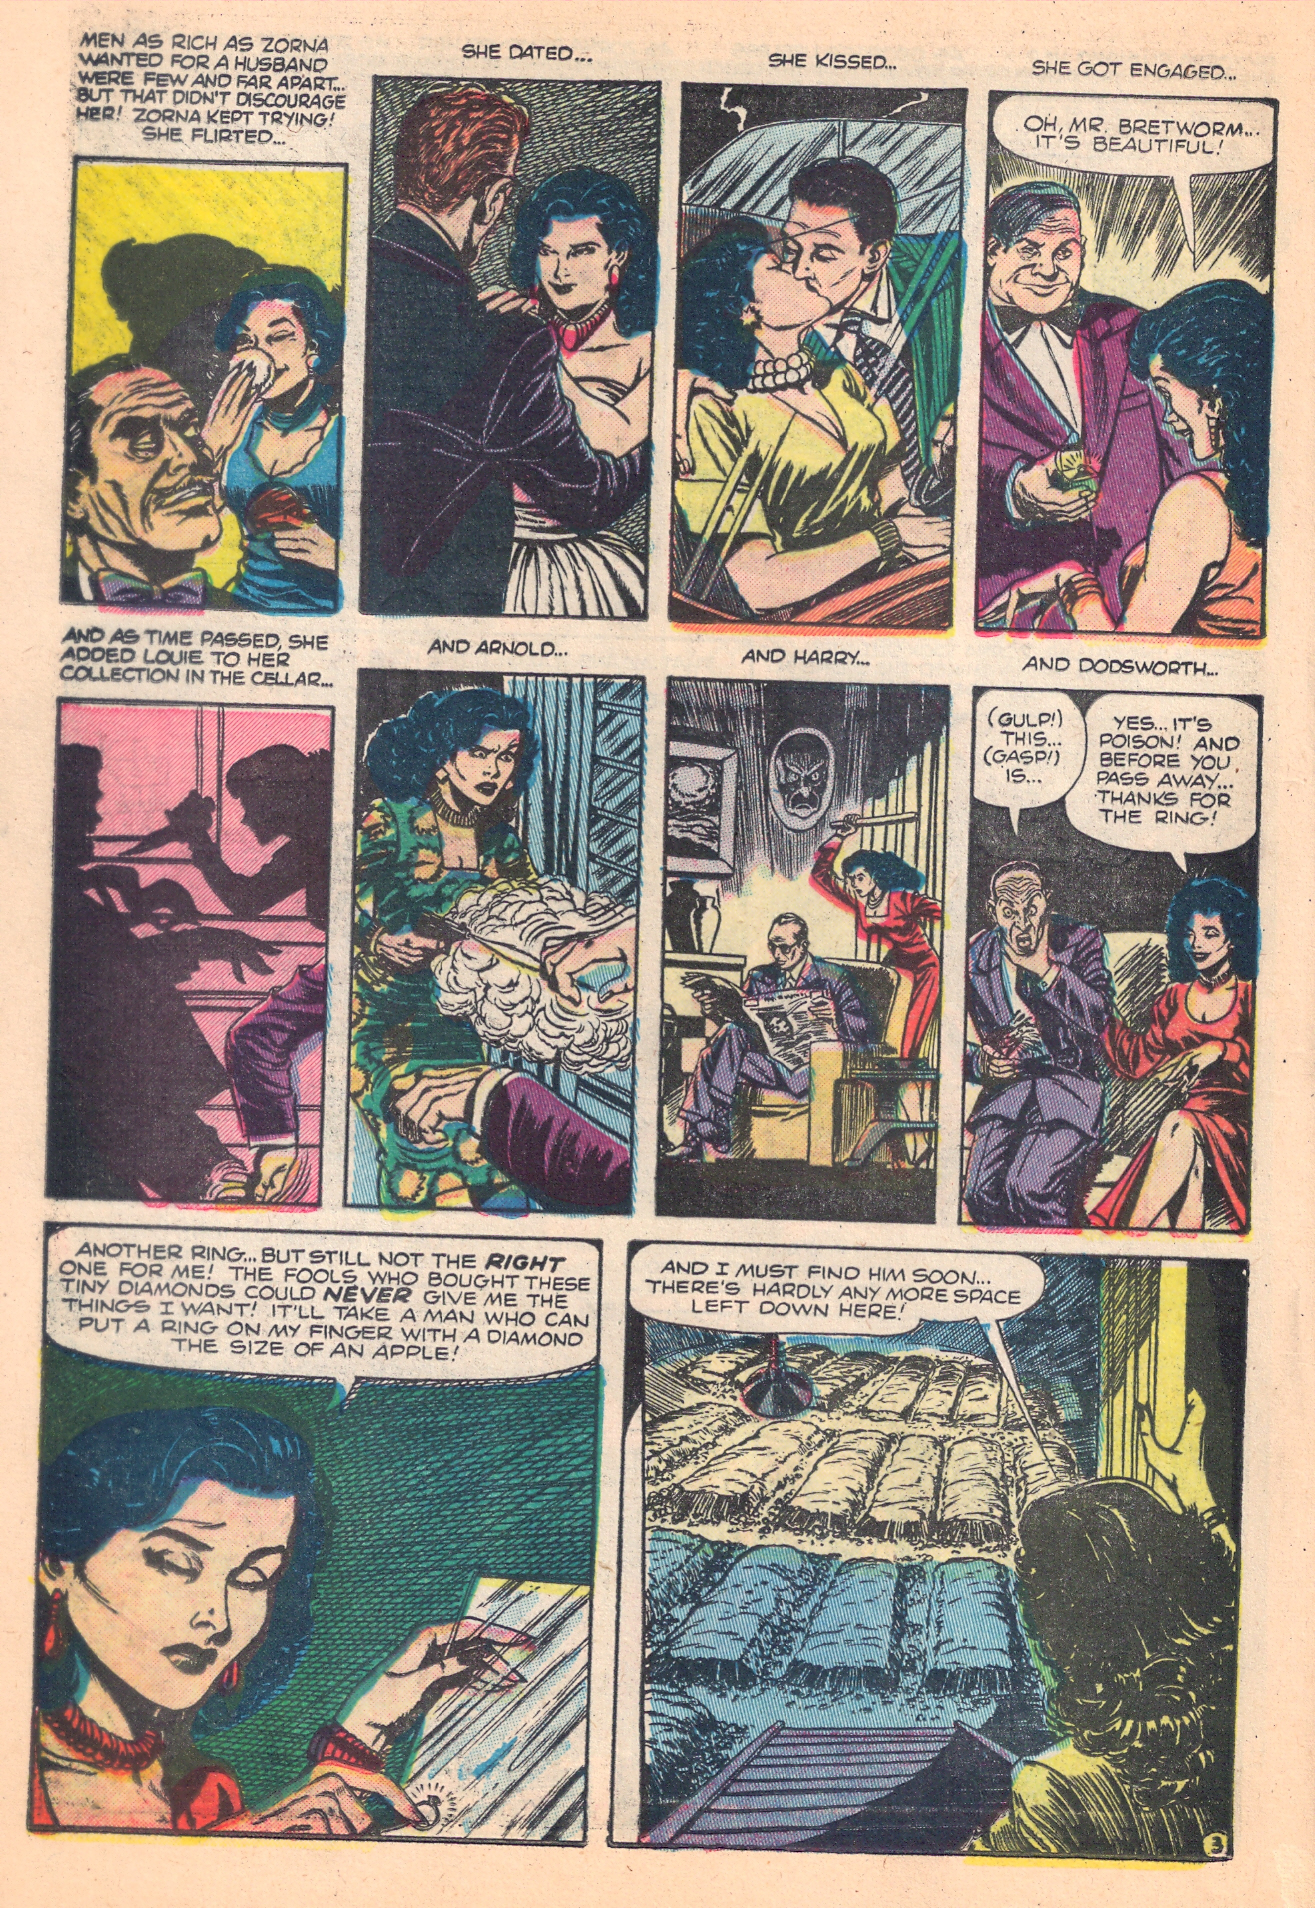 Marvel Tales (1949) 119 Page 11